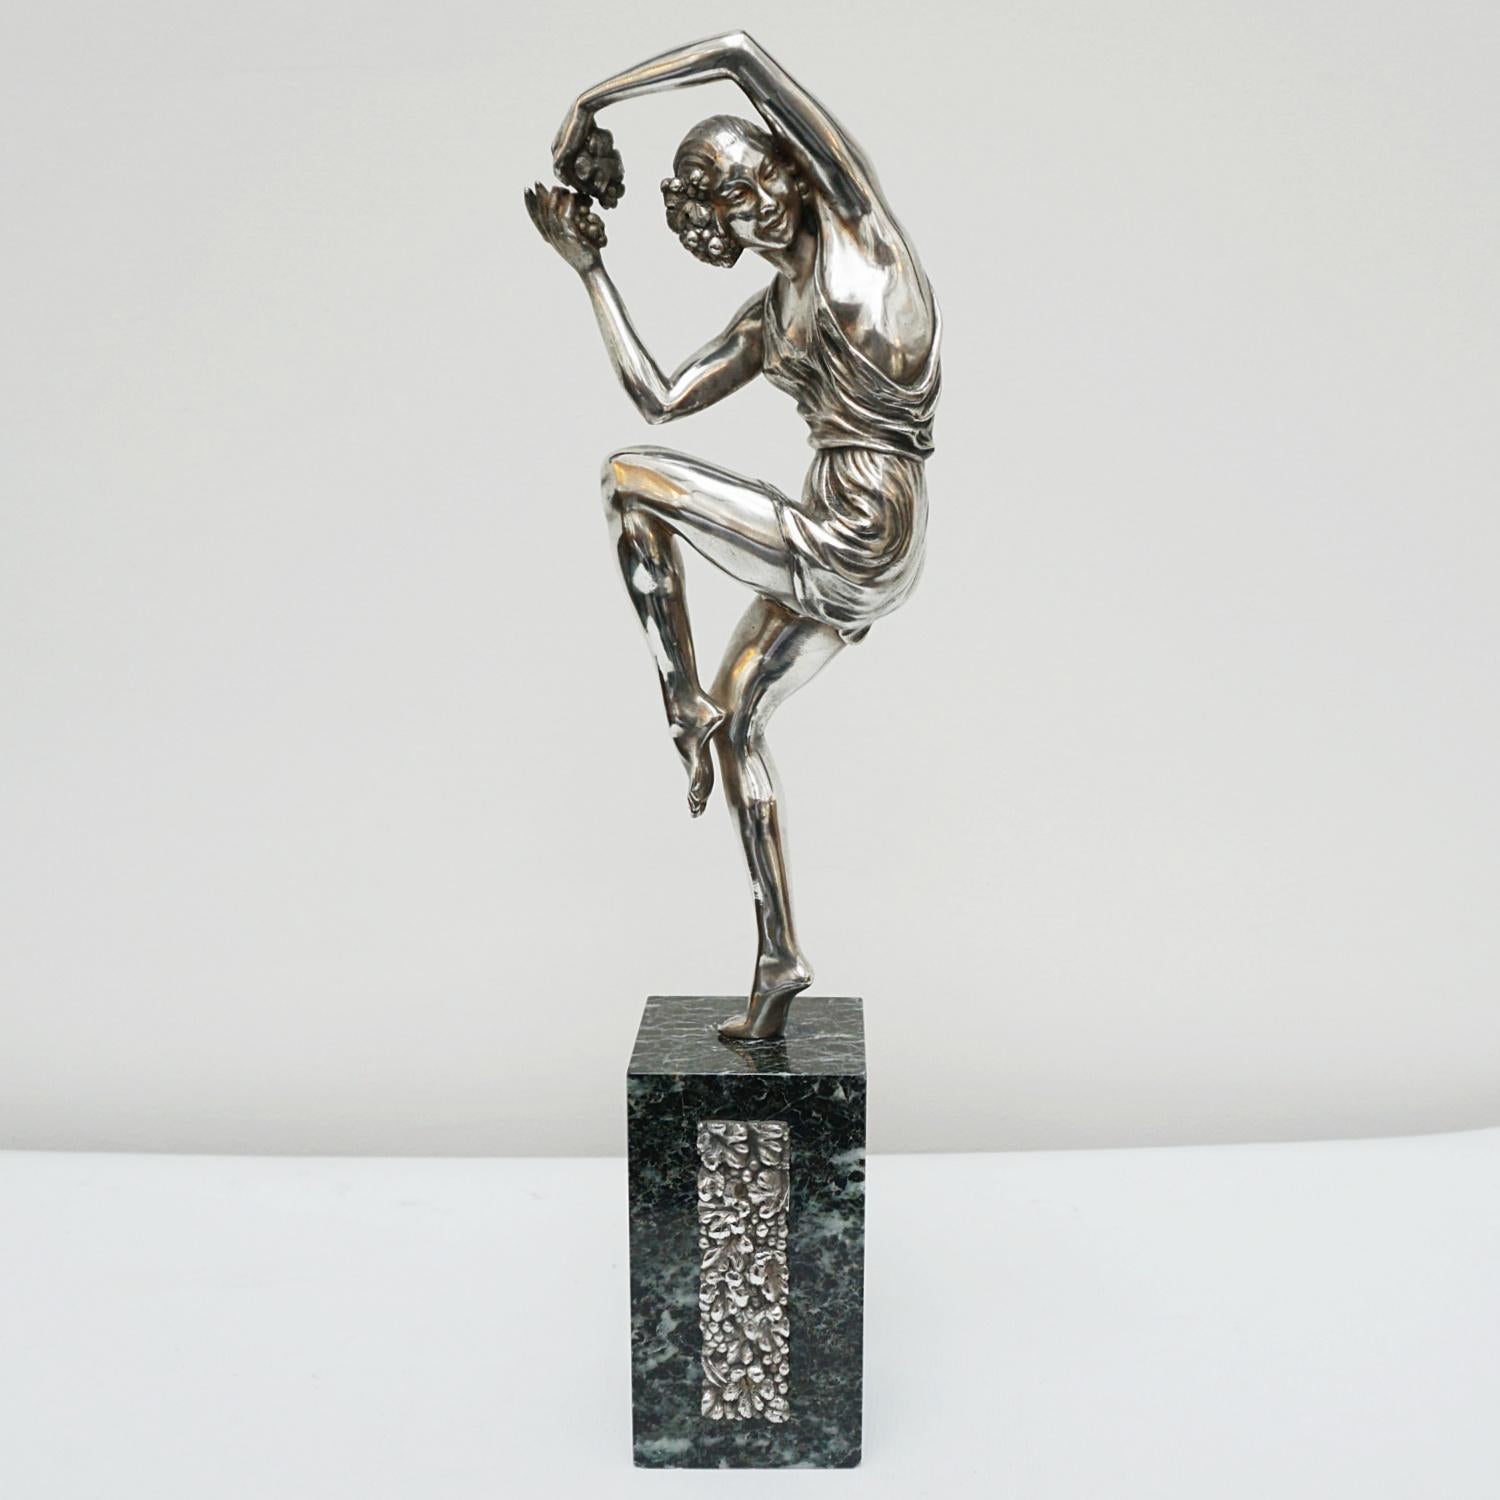 An Art Deco bronze sculpture by Pierre Le Faguays (1892-1962). An elegant female dancer in a playful pose holding a bunch of grapes between her hands, wearing a loose fitting dress. SIlvered bronze, set over a marble base with a silvered bronze